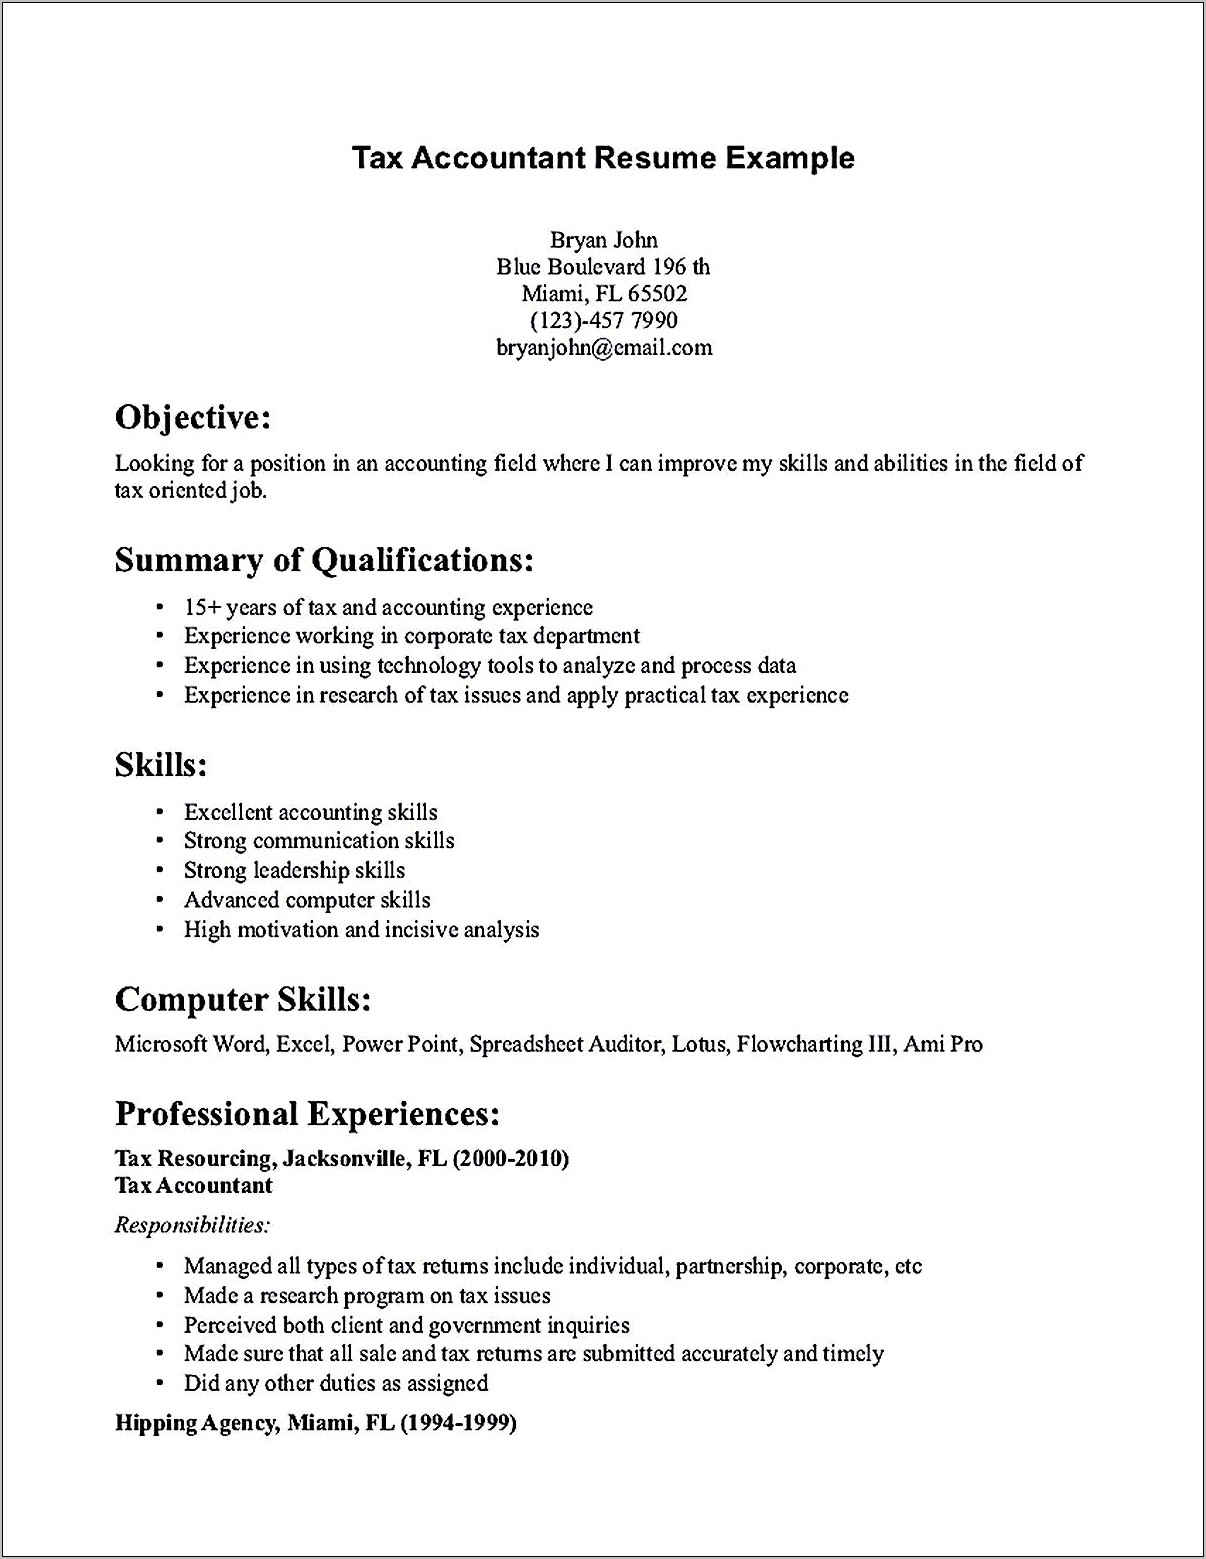 Tax Accountant Resume Objective Examples